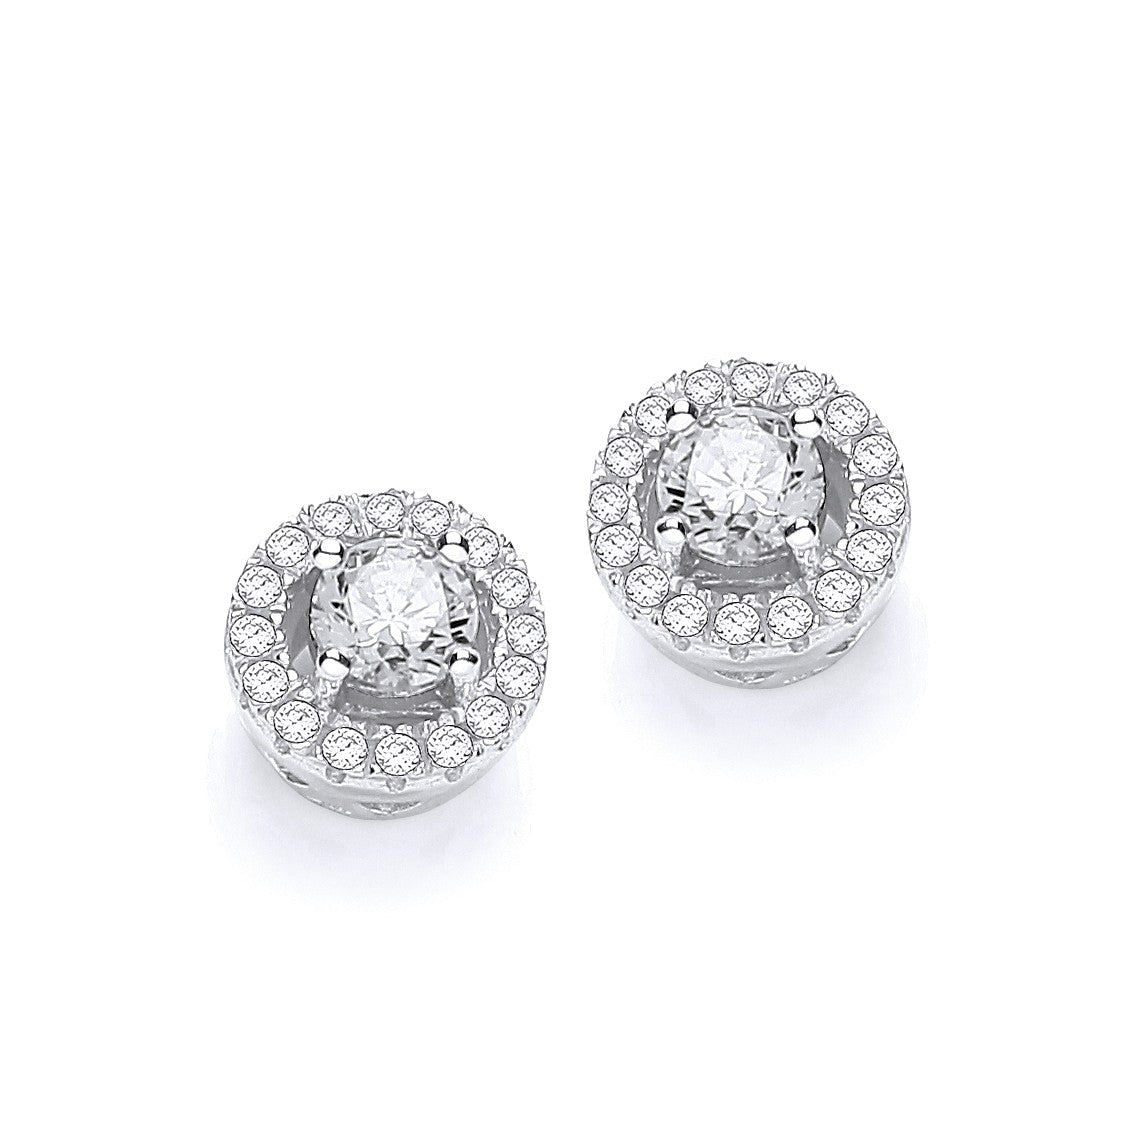 925 Sterling Silver Cluster Stud Earrings Set With CZs - FJewellery